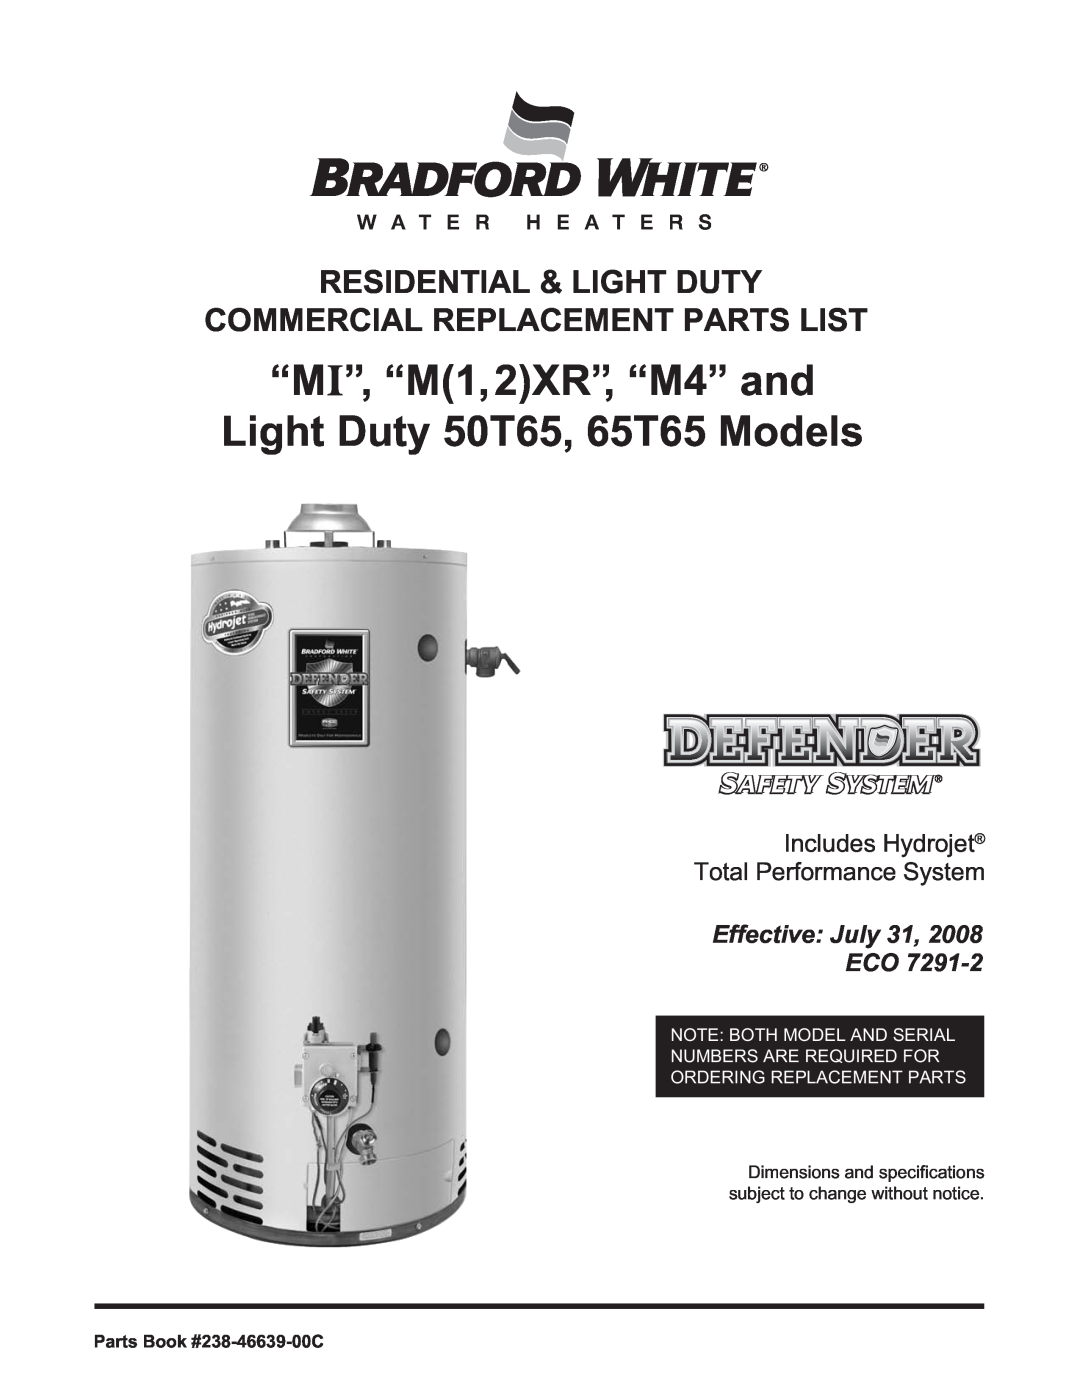 Bradford-White Corp dimensions “MI”, “M1,2XR”, “M4” and Light Duty 50T65, 65T65 Models, Effective July 31 ECO 